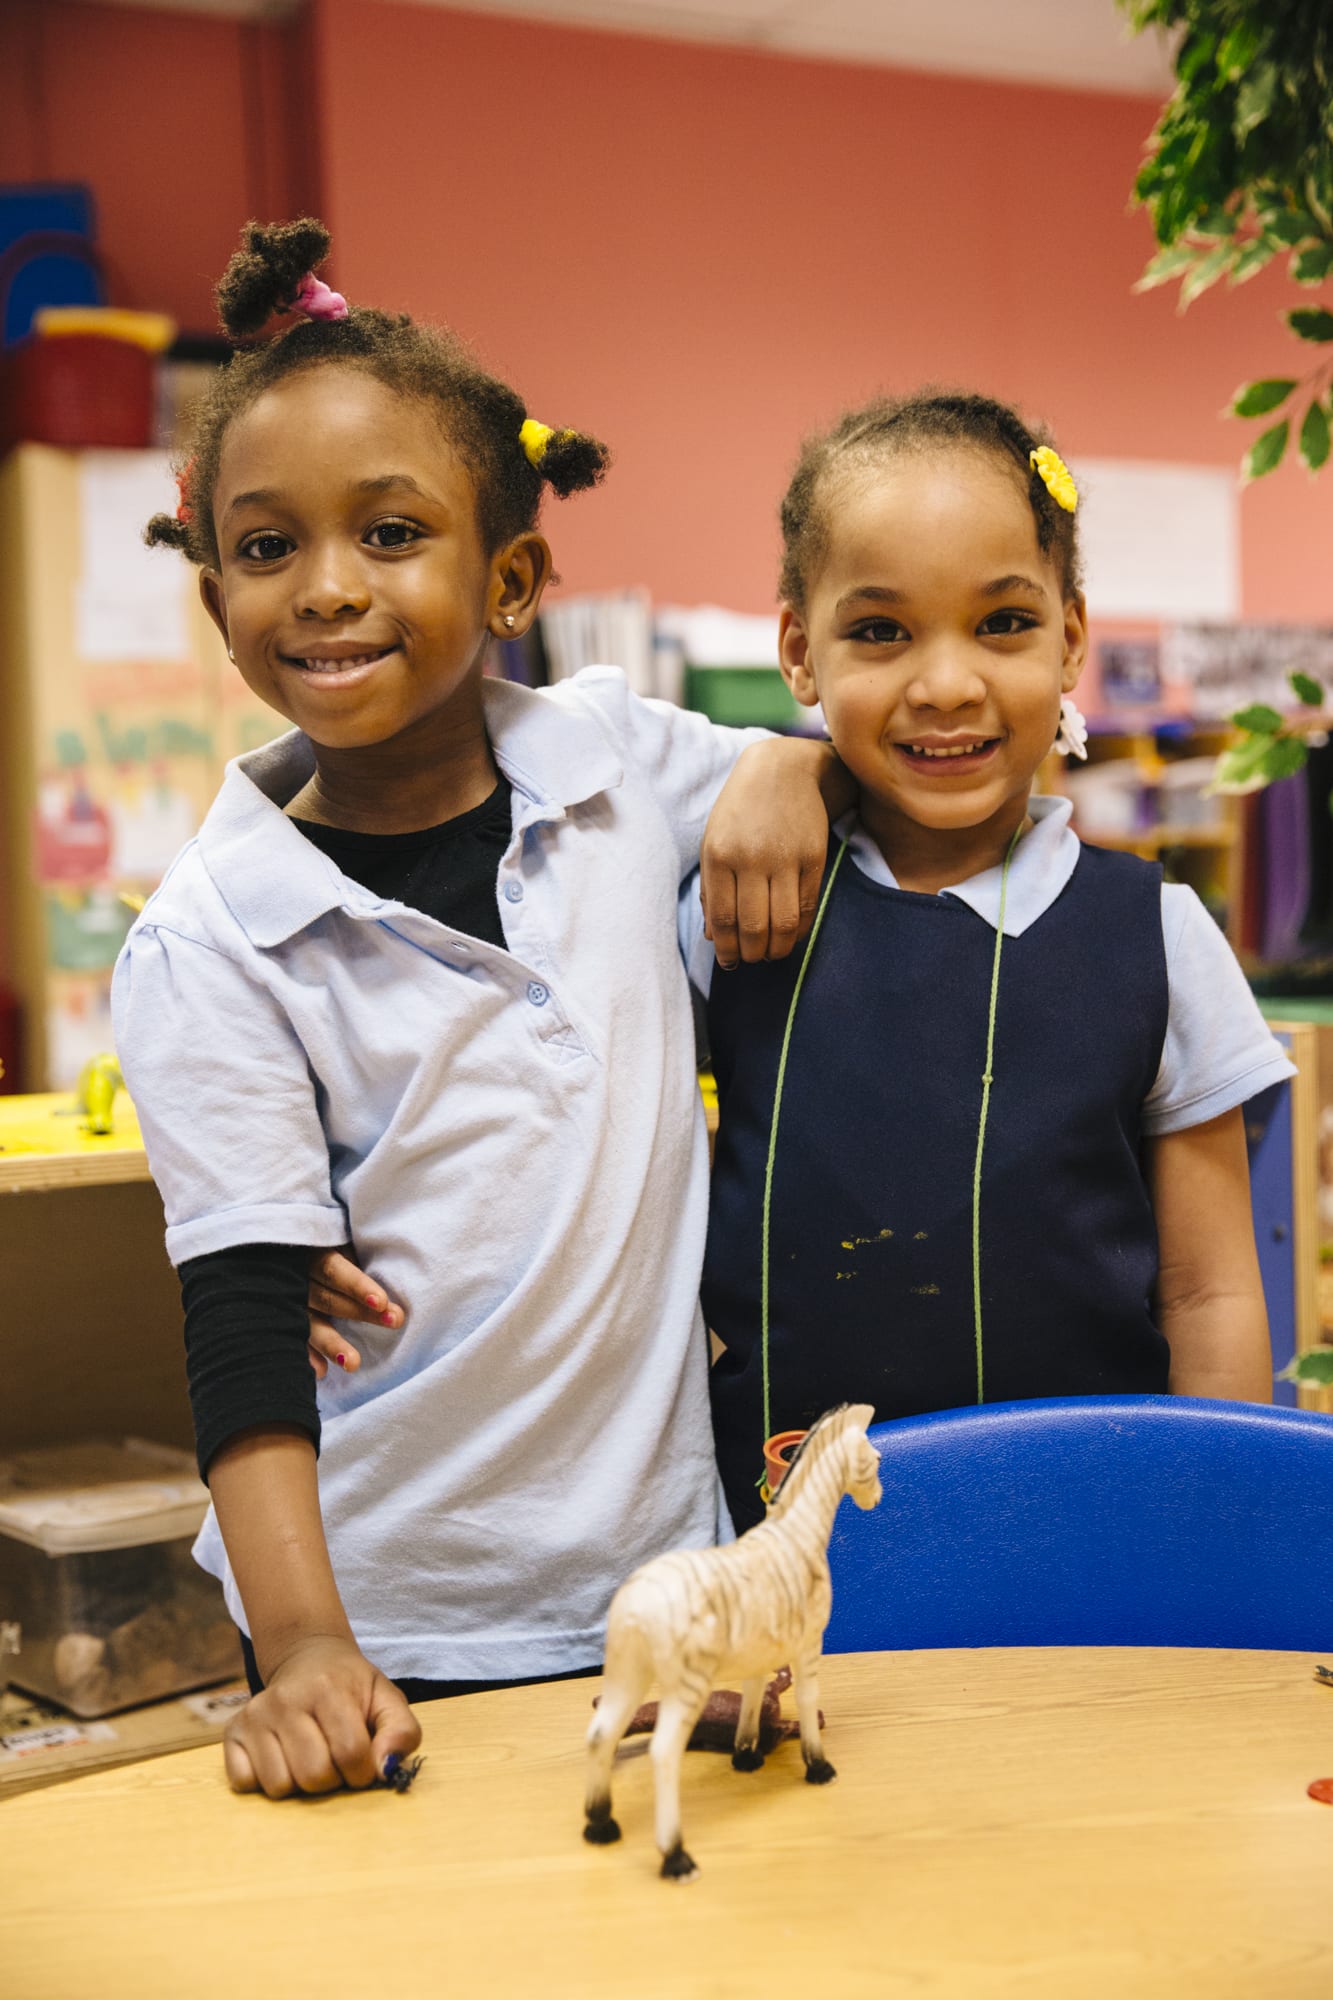 Urban League of Essex County Early Childhood Education